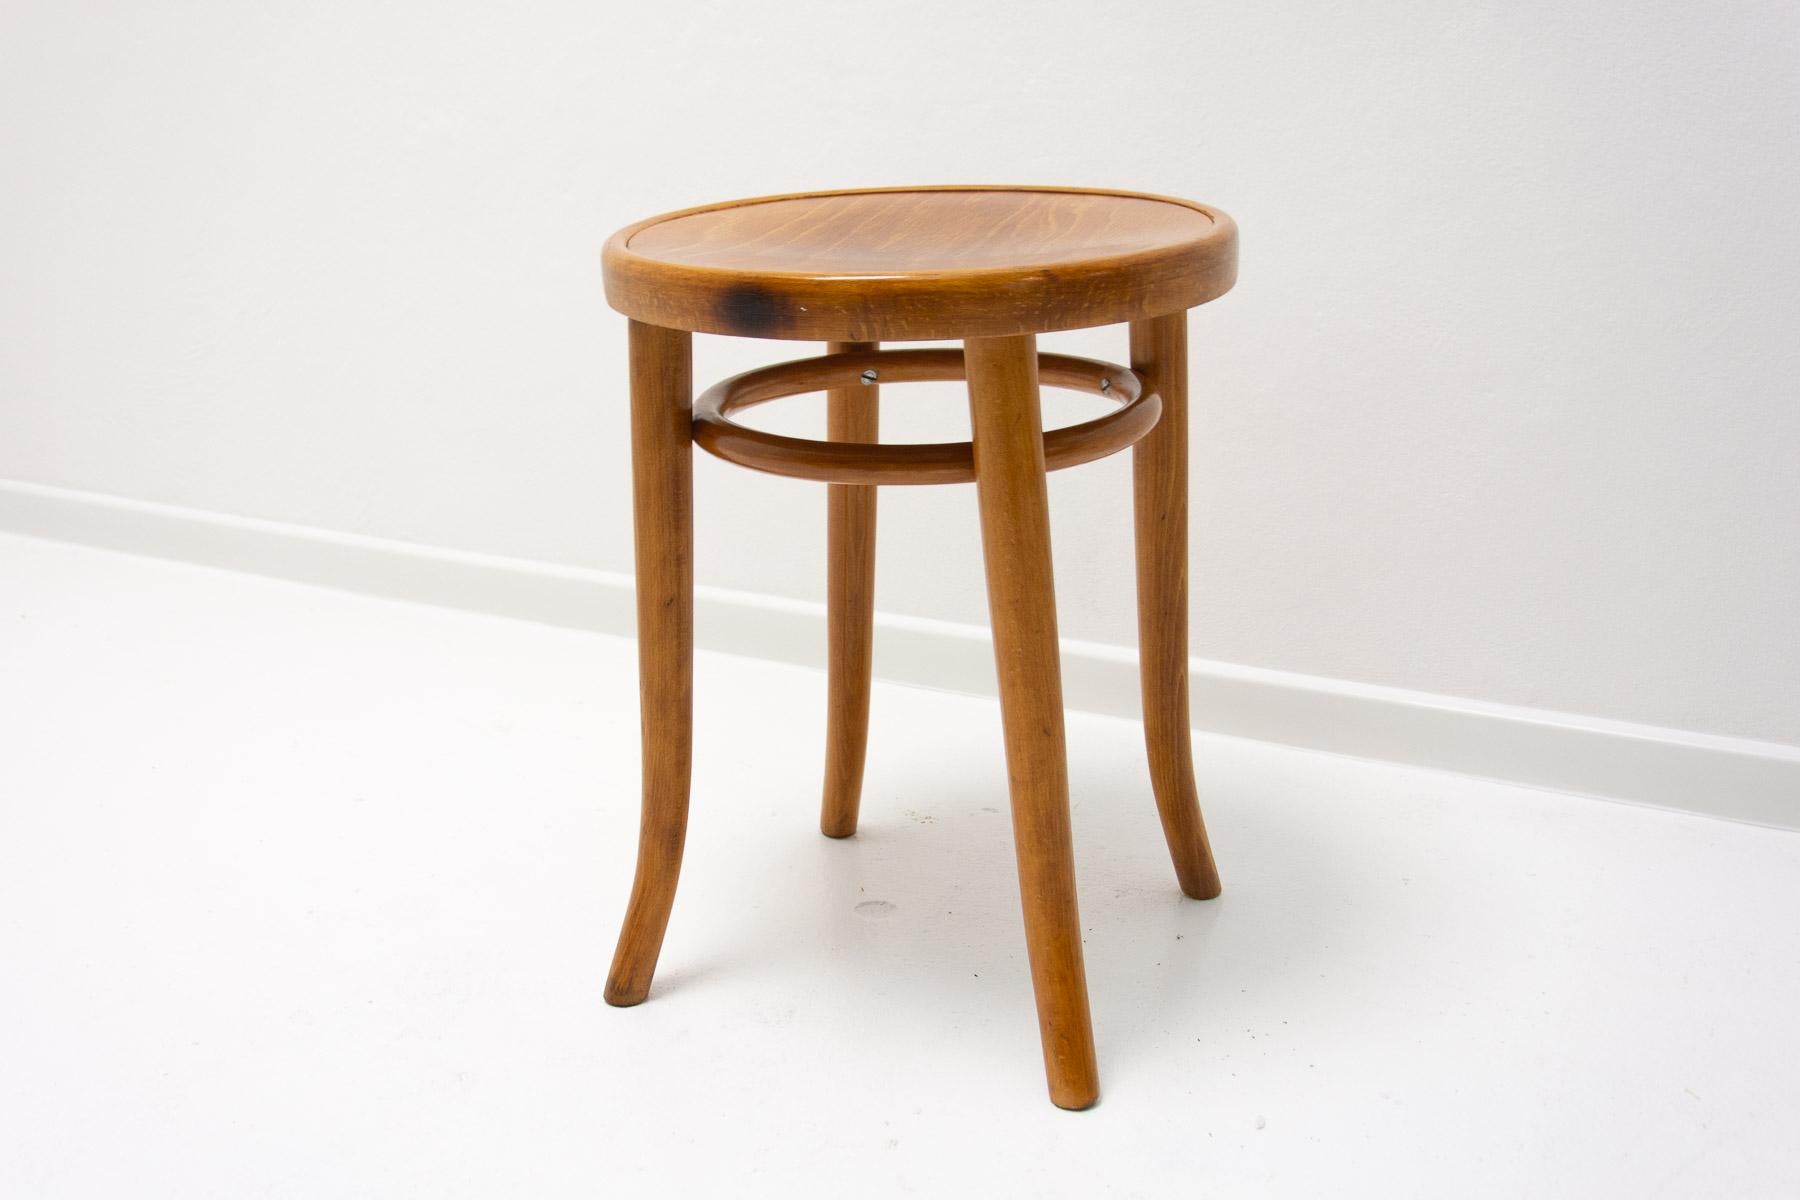 A classic bentwood stool from the 1920s. The circular stool is made from beech, with a plywood seat top. Manufacturer’s mark stamped under the seat. In very good condition, after renovation.

Height: 48 cm width: 37 cm depth: 35 cm Seat height :